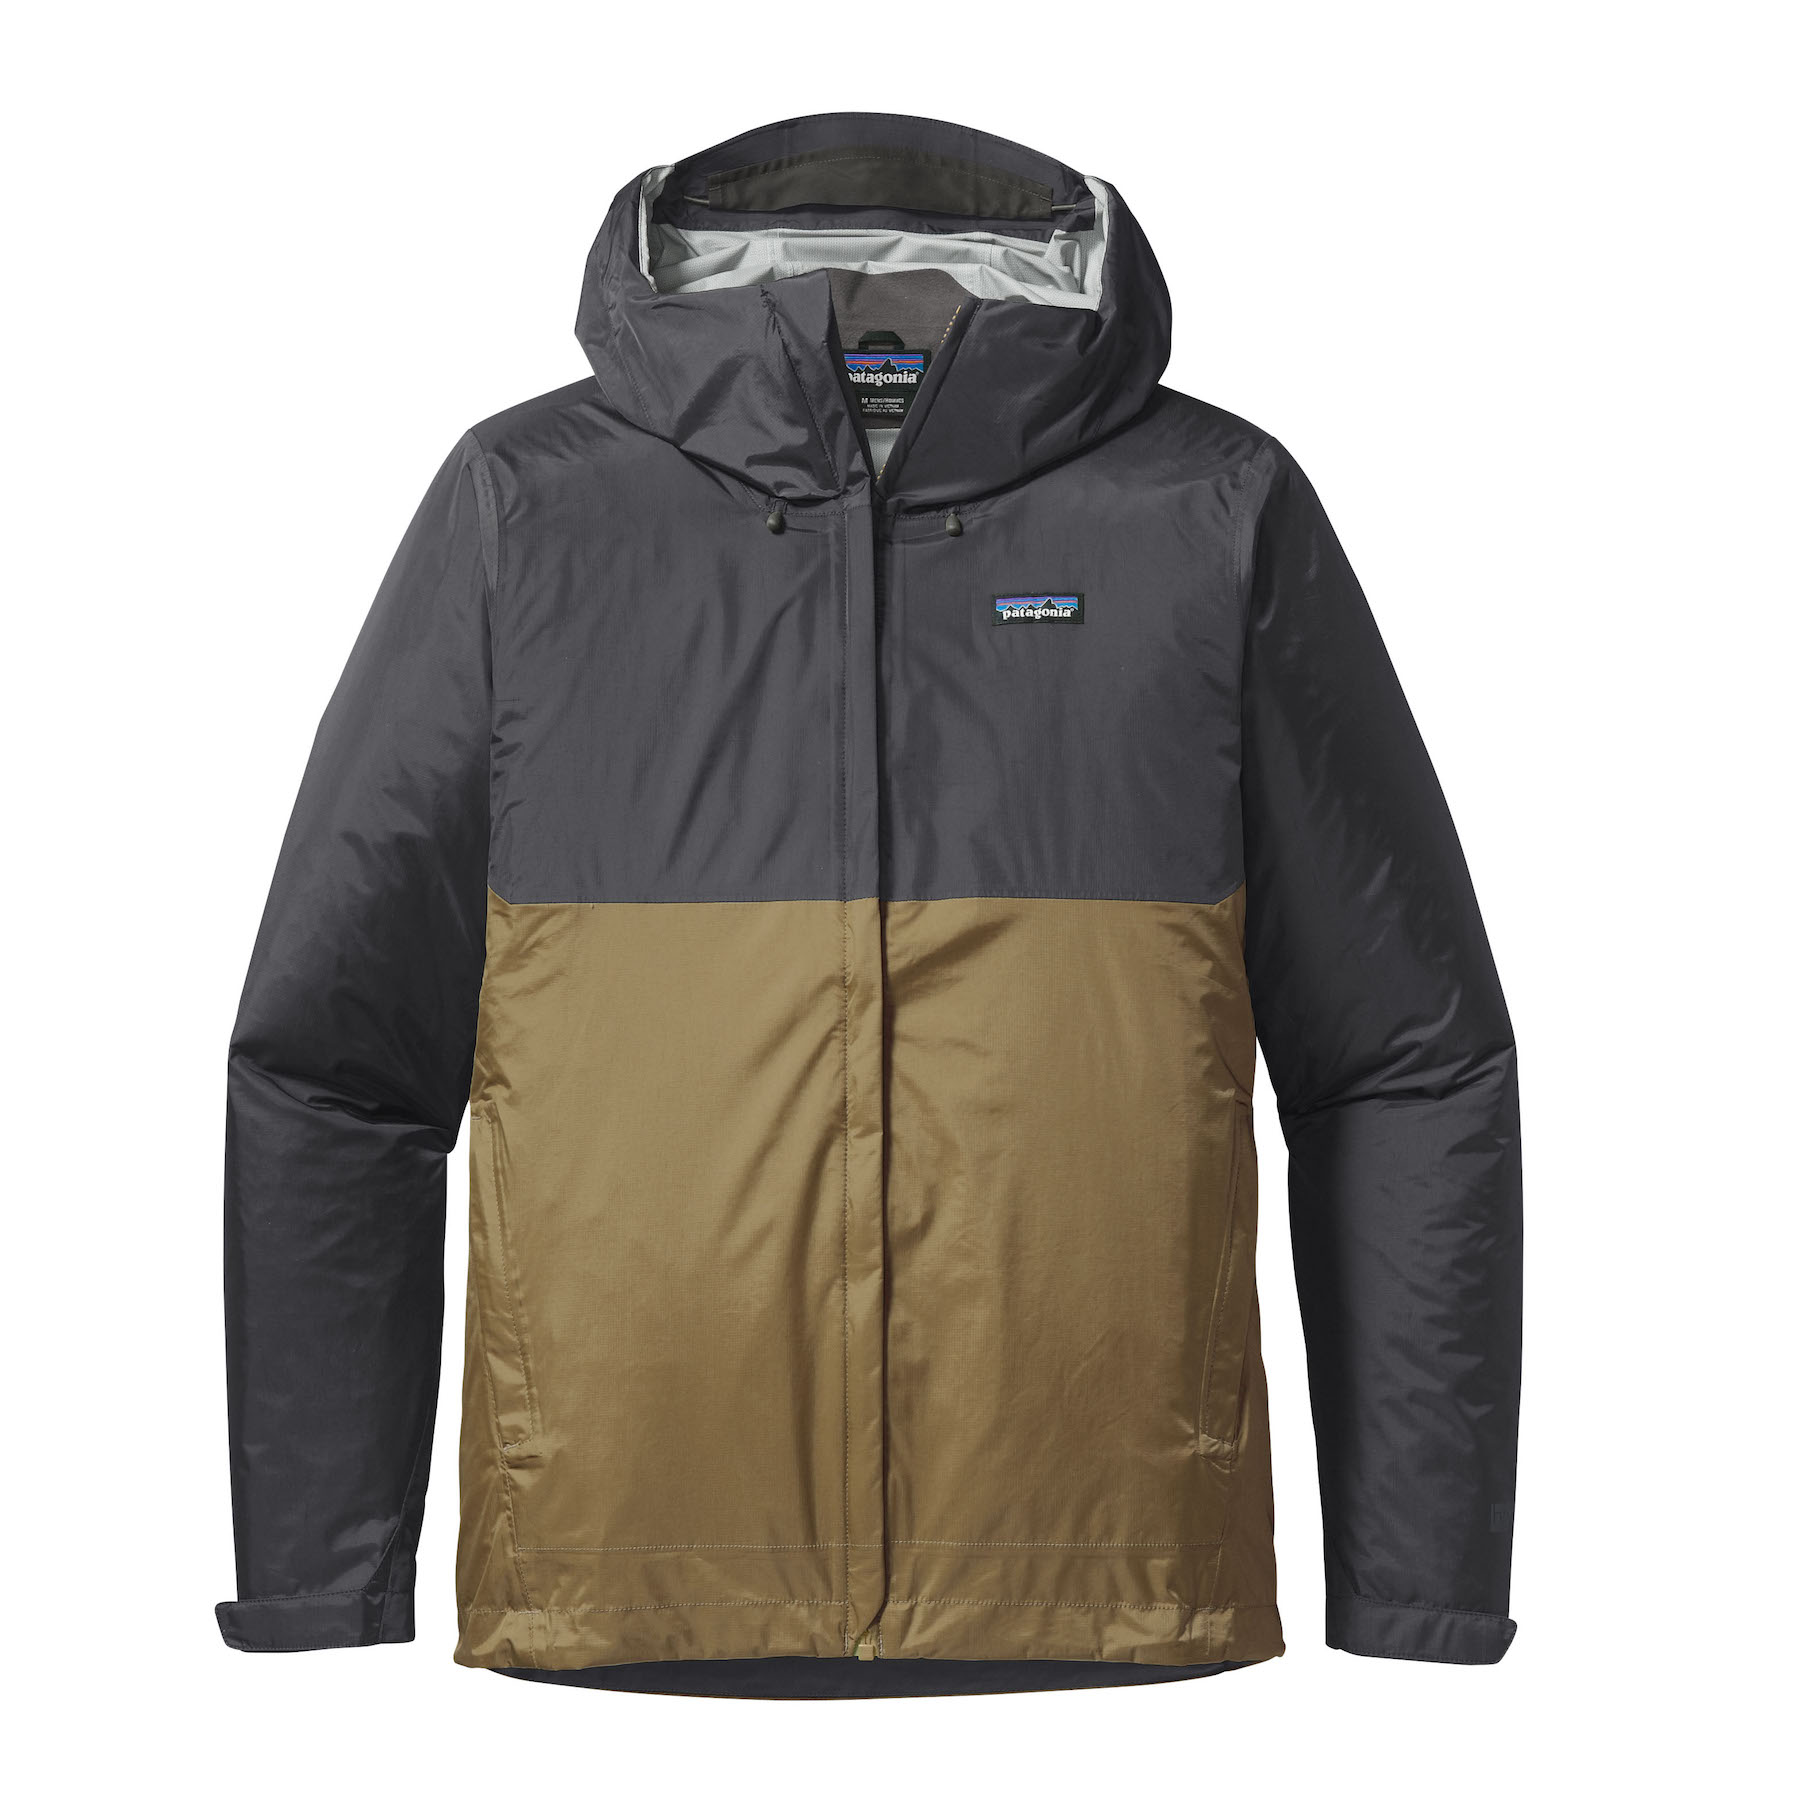 Patagonia - Torrentshell - Chaqueta impermeable - Hombre